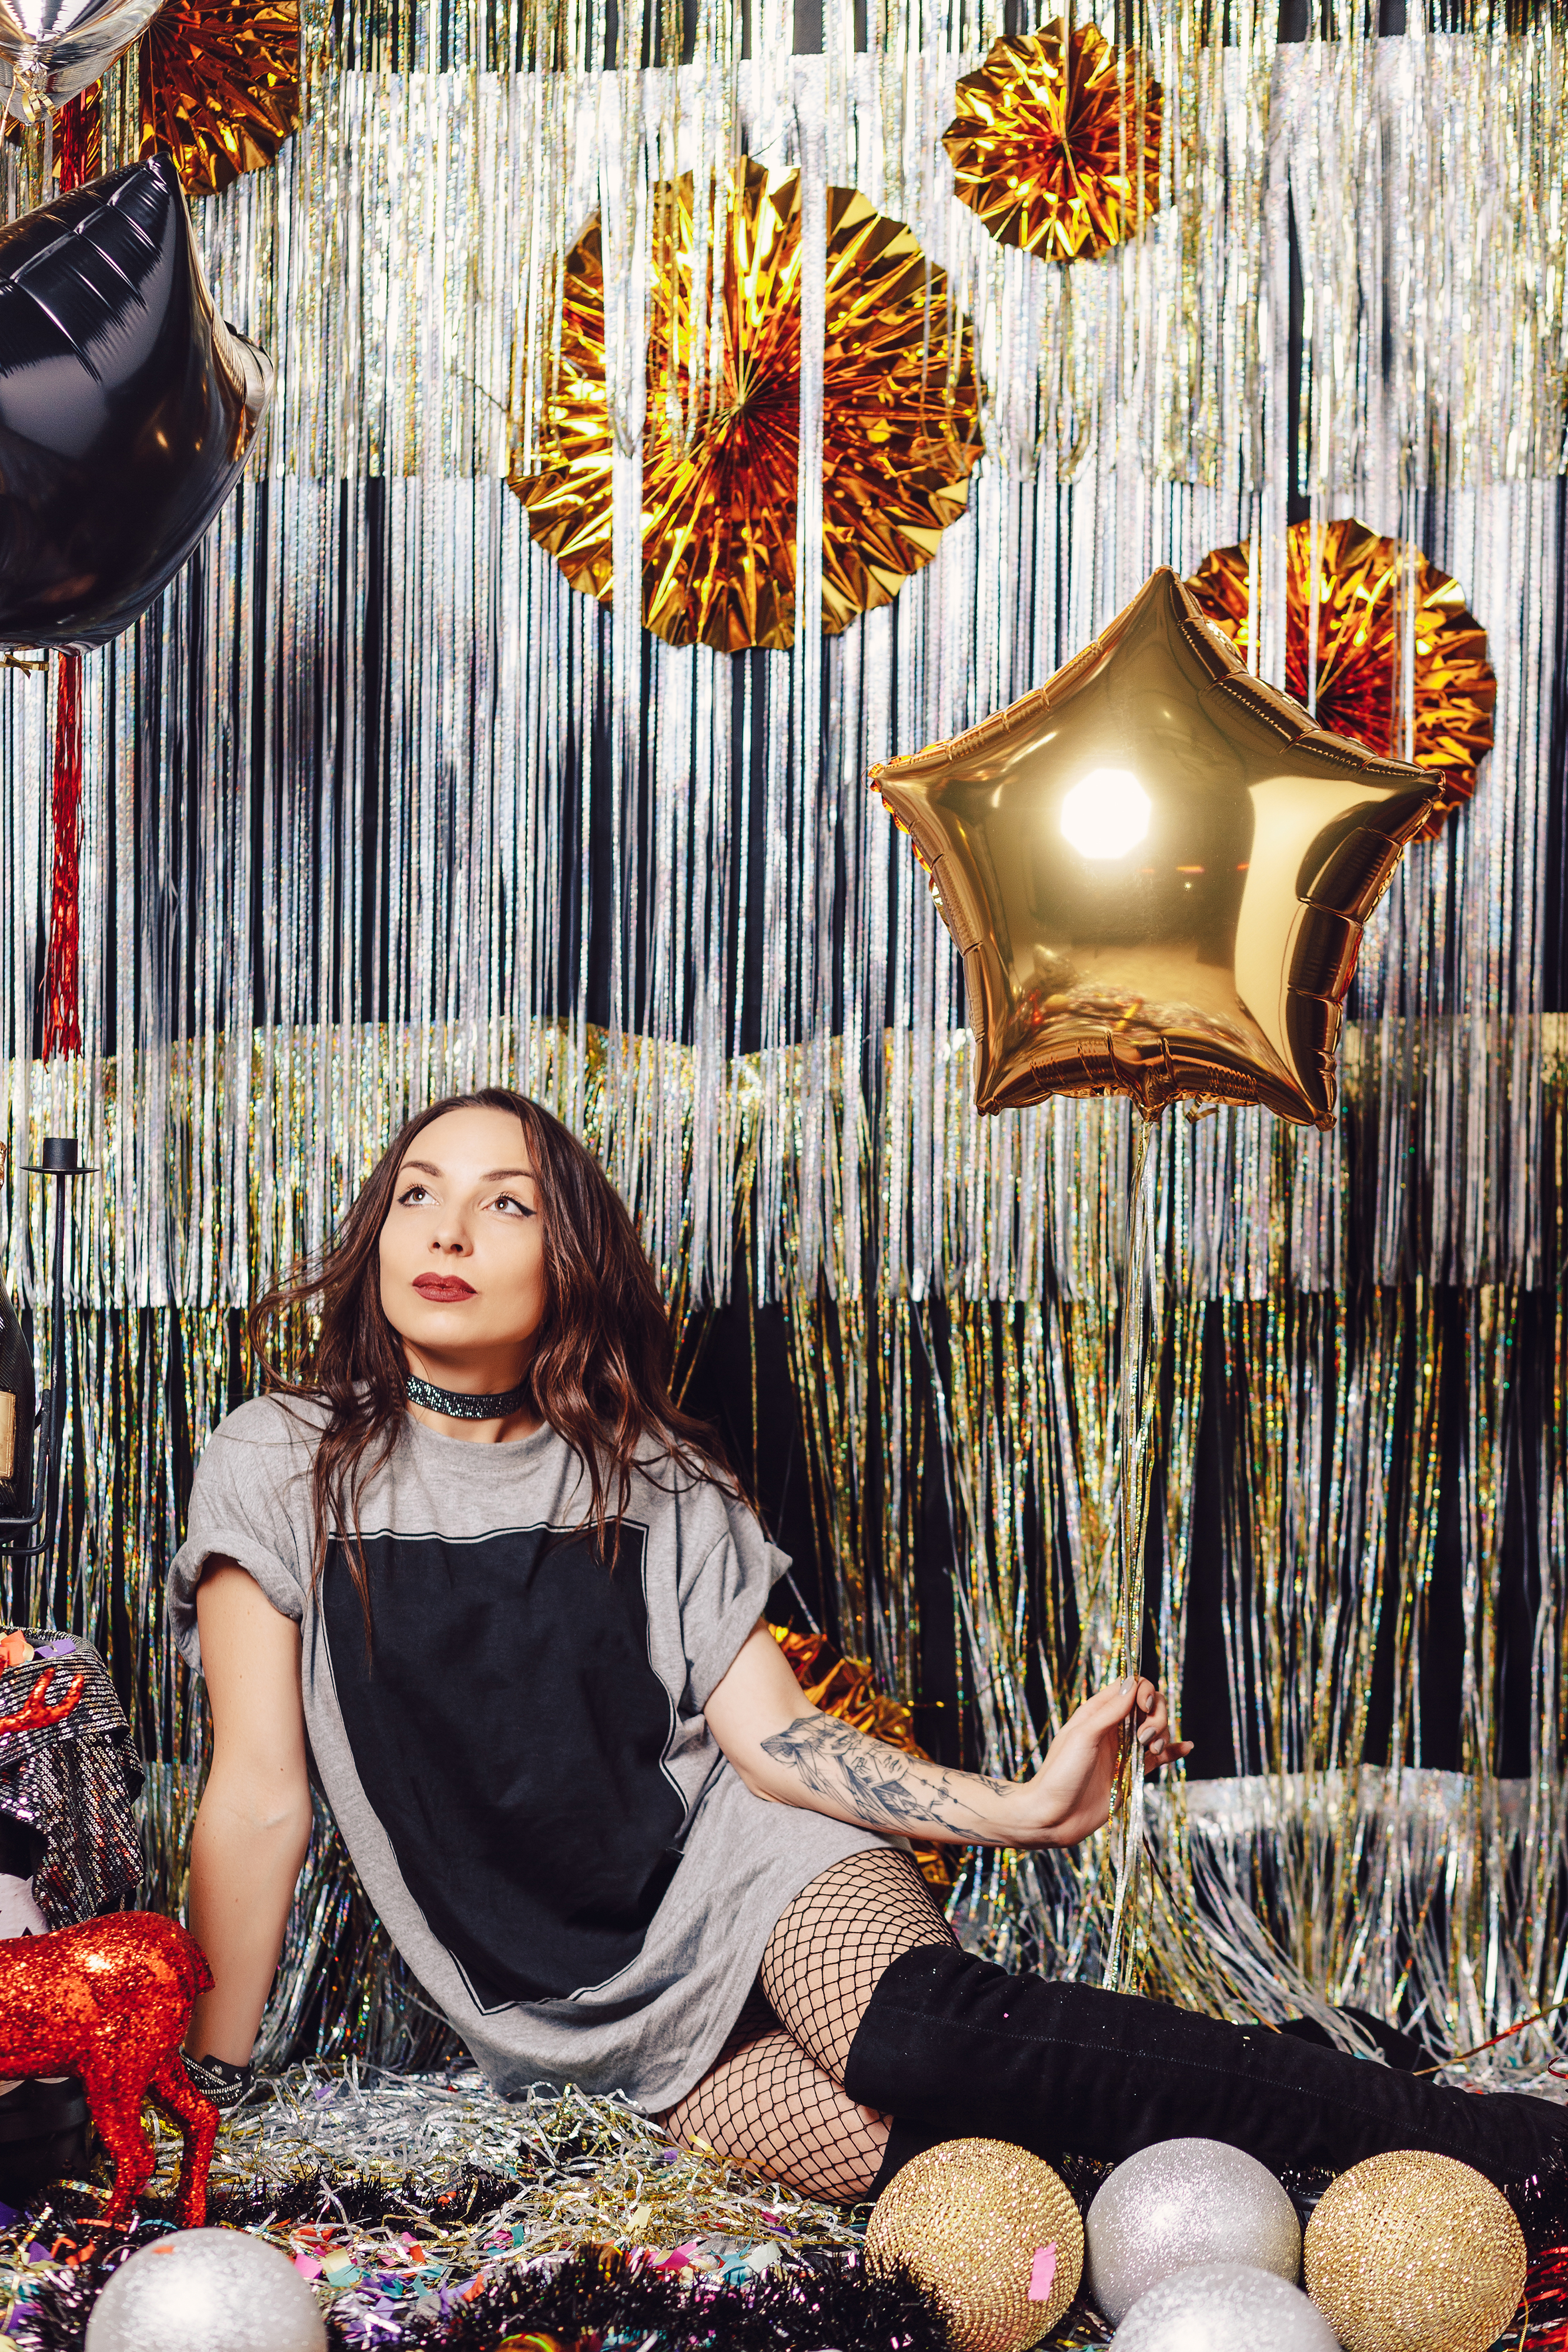 Teen girl in sitting against a birthday party backdrop with metallic balloons | Source: Freepik